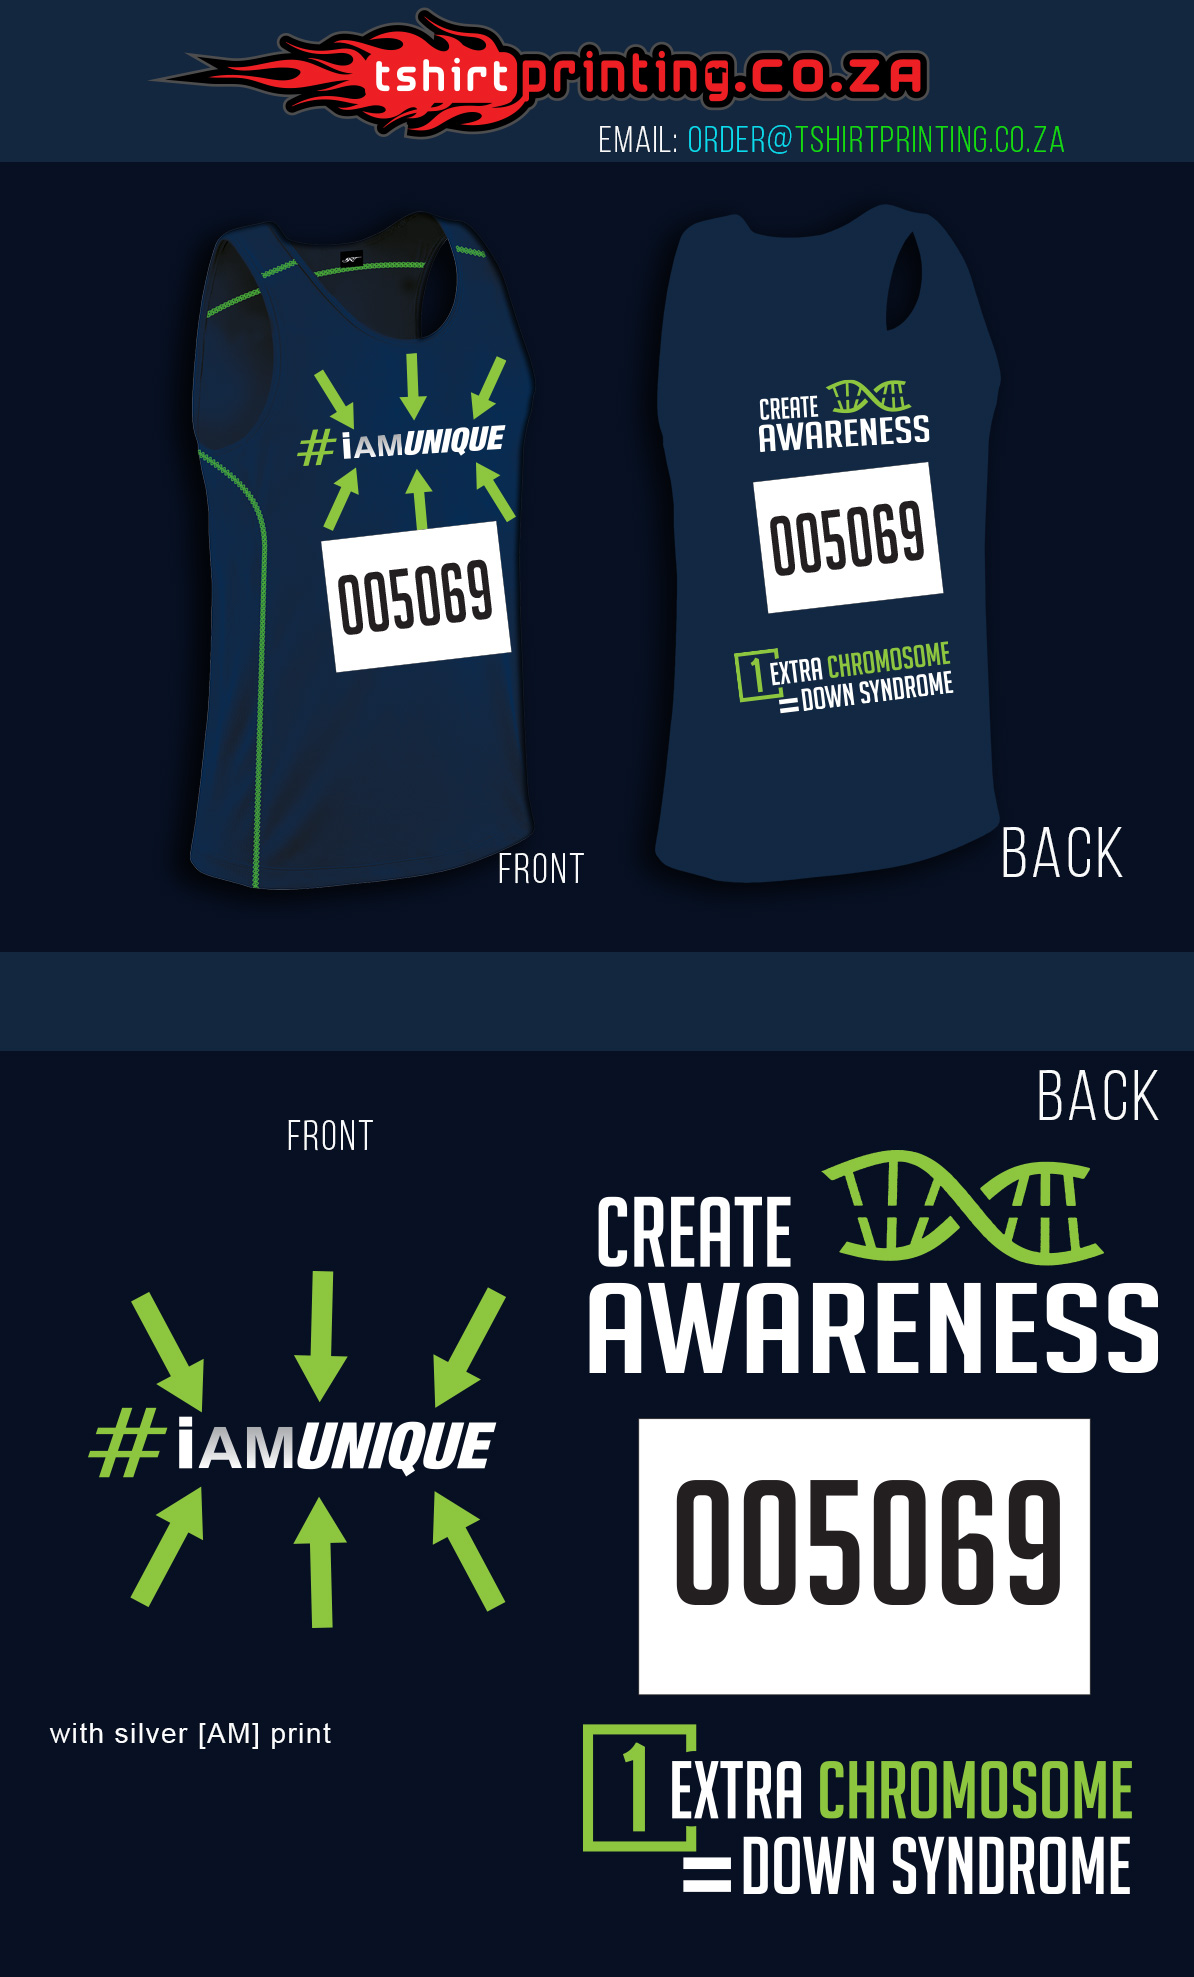 vest-printing-mock-up-for-awareness-campaign-shirts-promoting-cause-about-down-syndrome